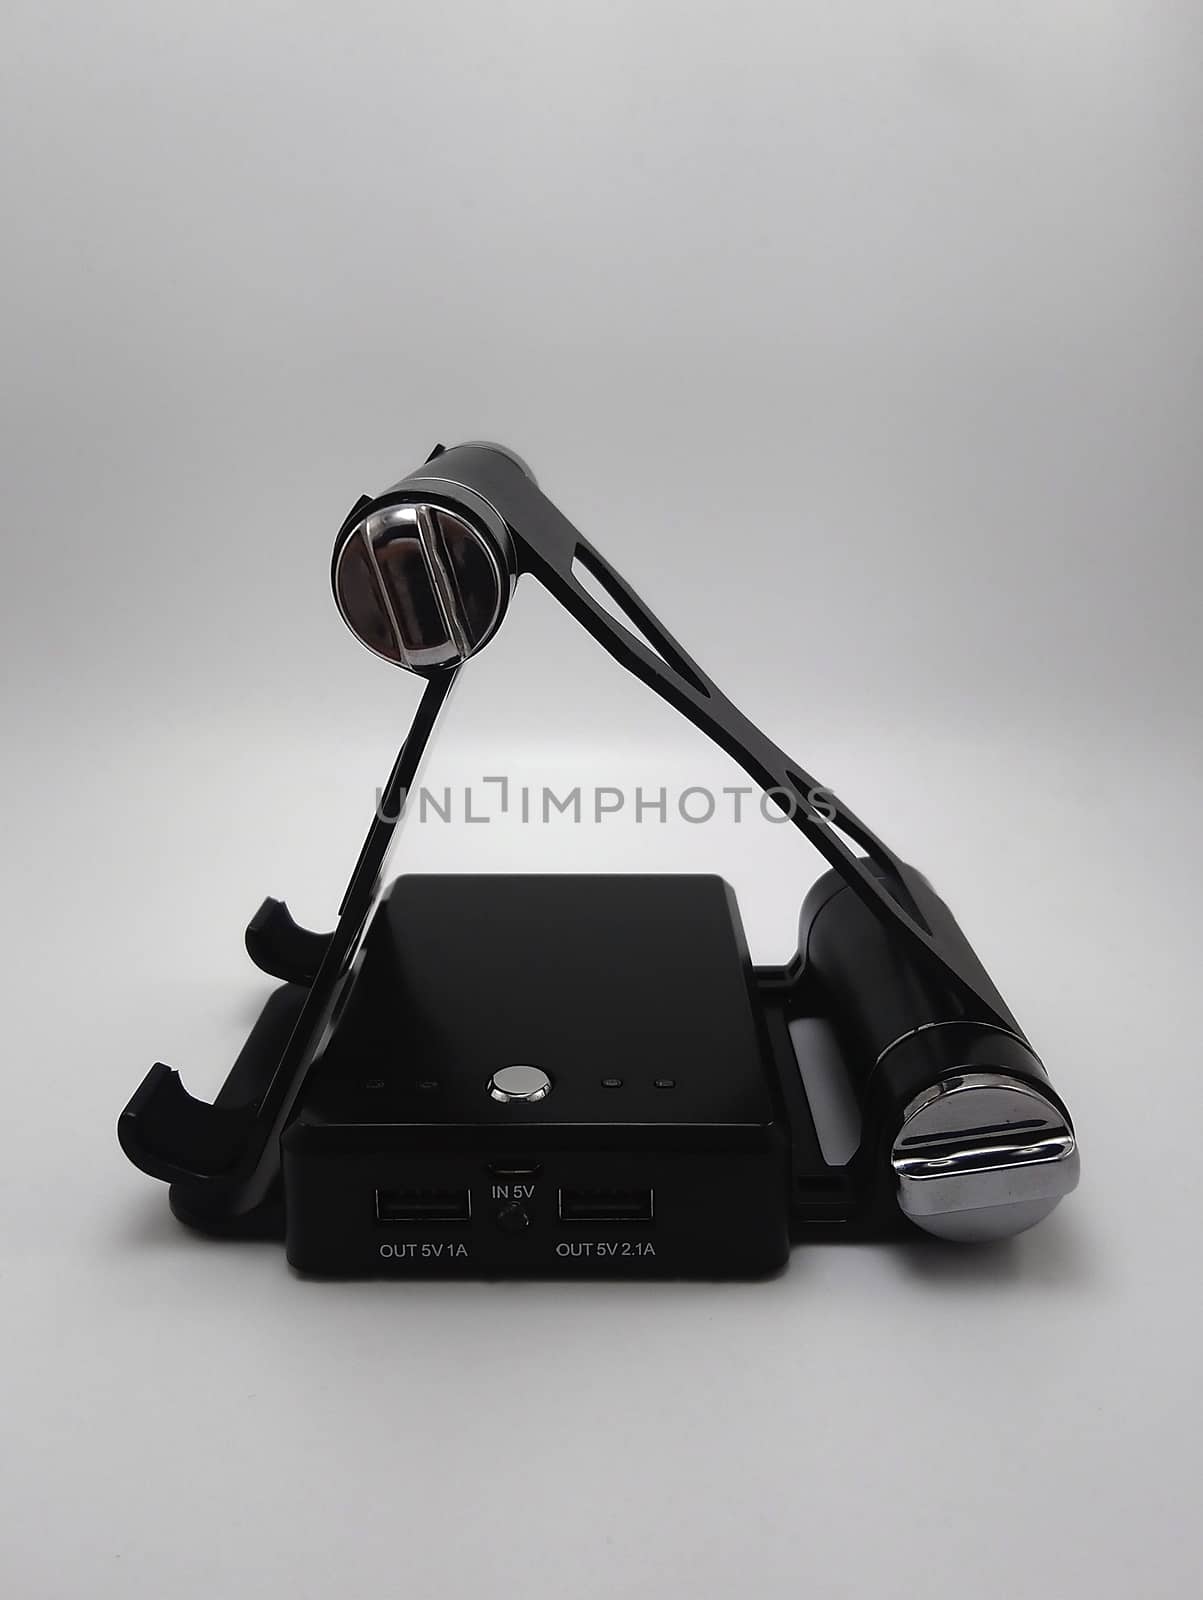 Foldable inclined stand powerbank charger use to charge low to empty battery of smartphone